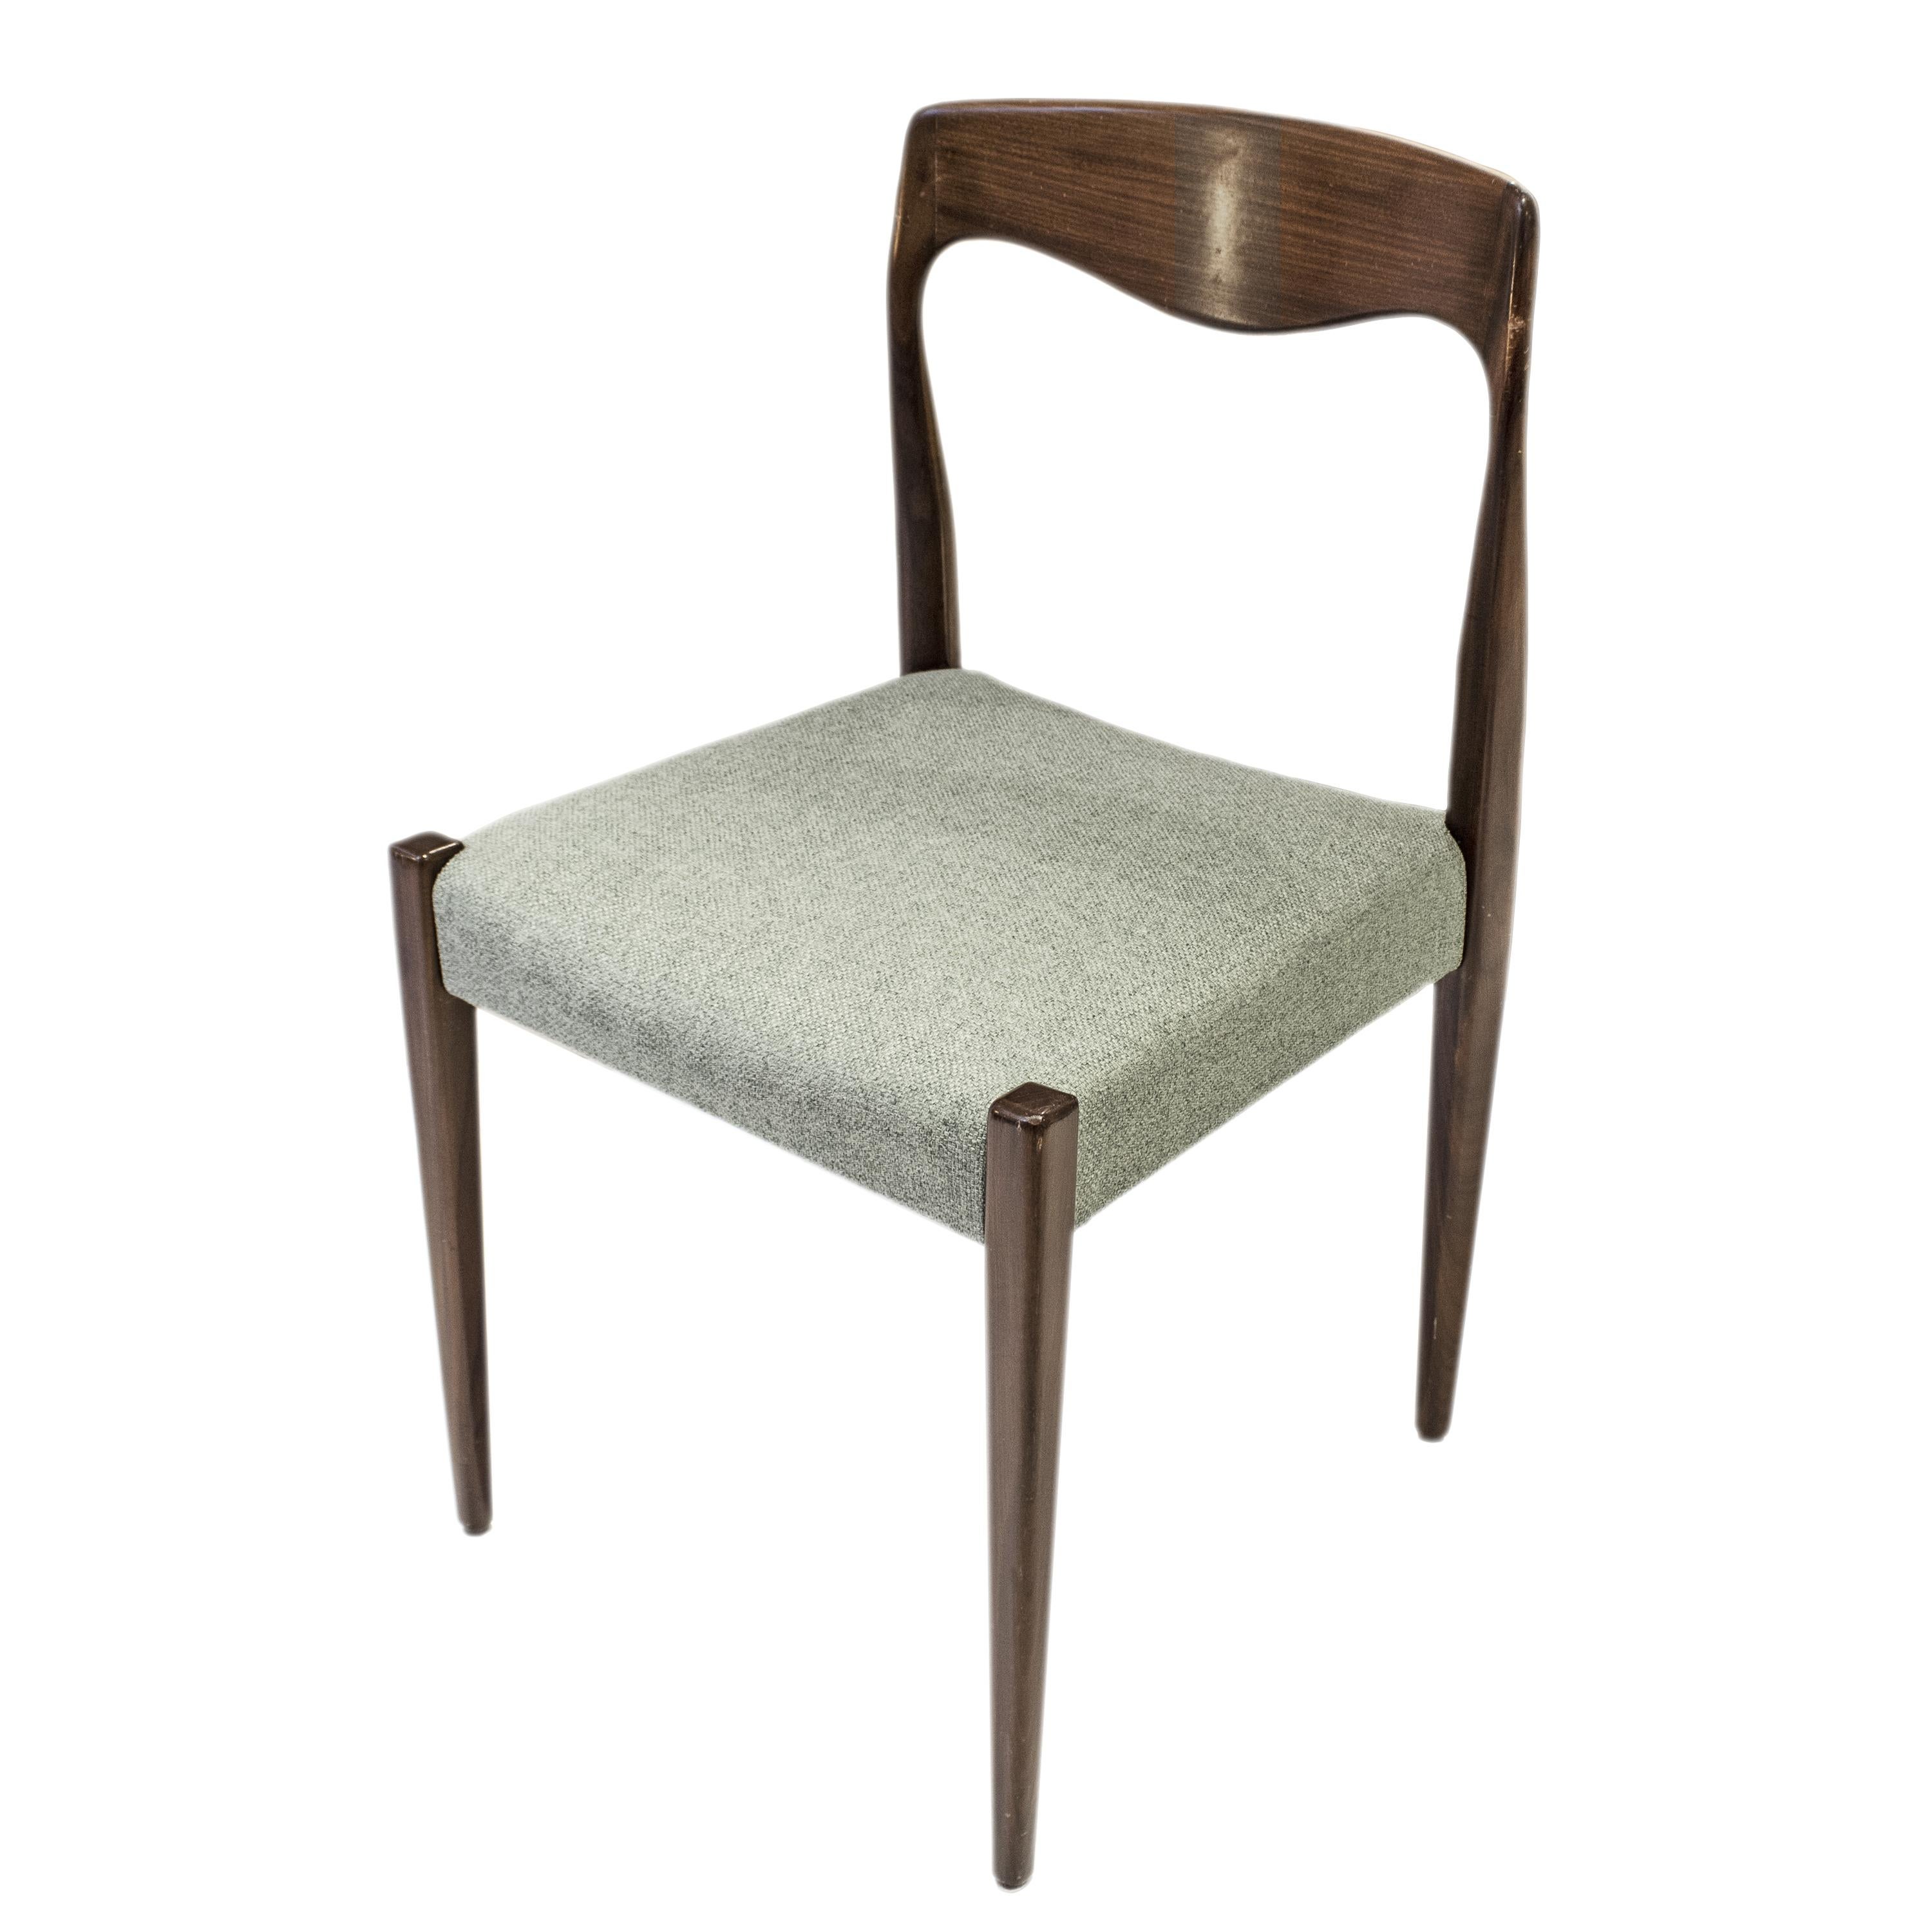 Set of eight Moller-style chairs made in Denmark in the 1960s. The structure of the chair is made entirely of solid wood varnished and the seat is covered in foam, and upholstered in a green cotton fabric.